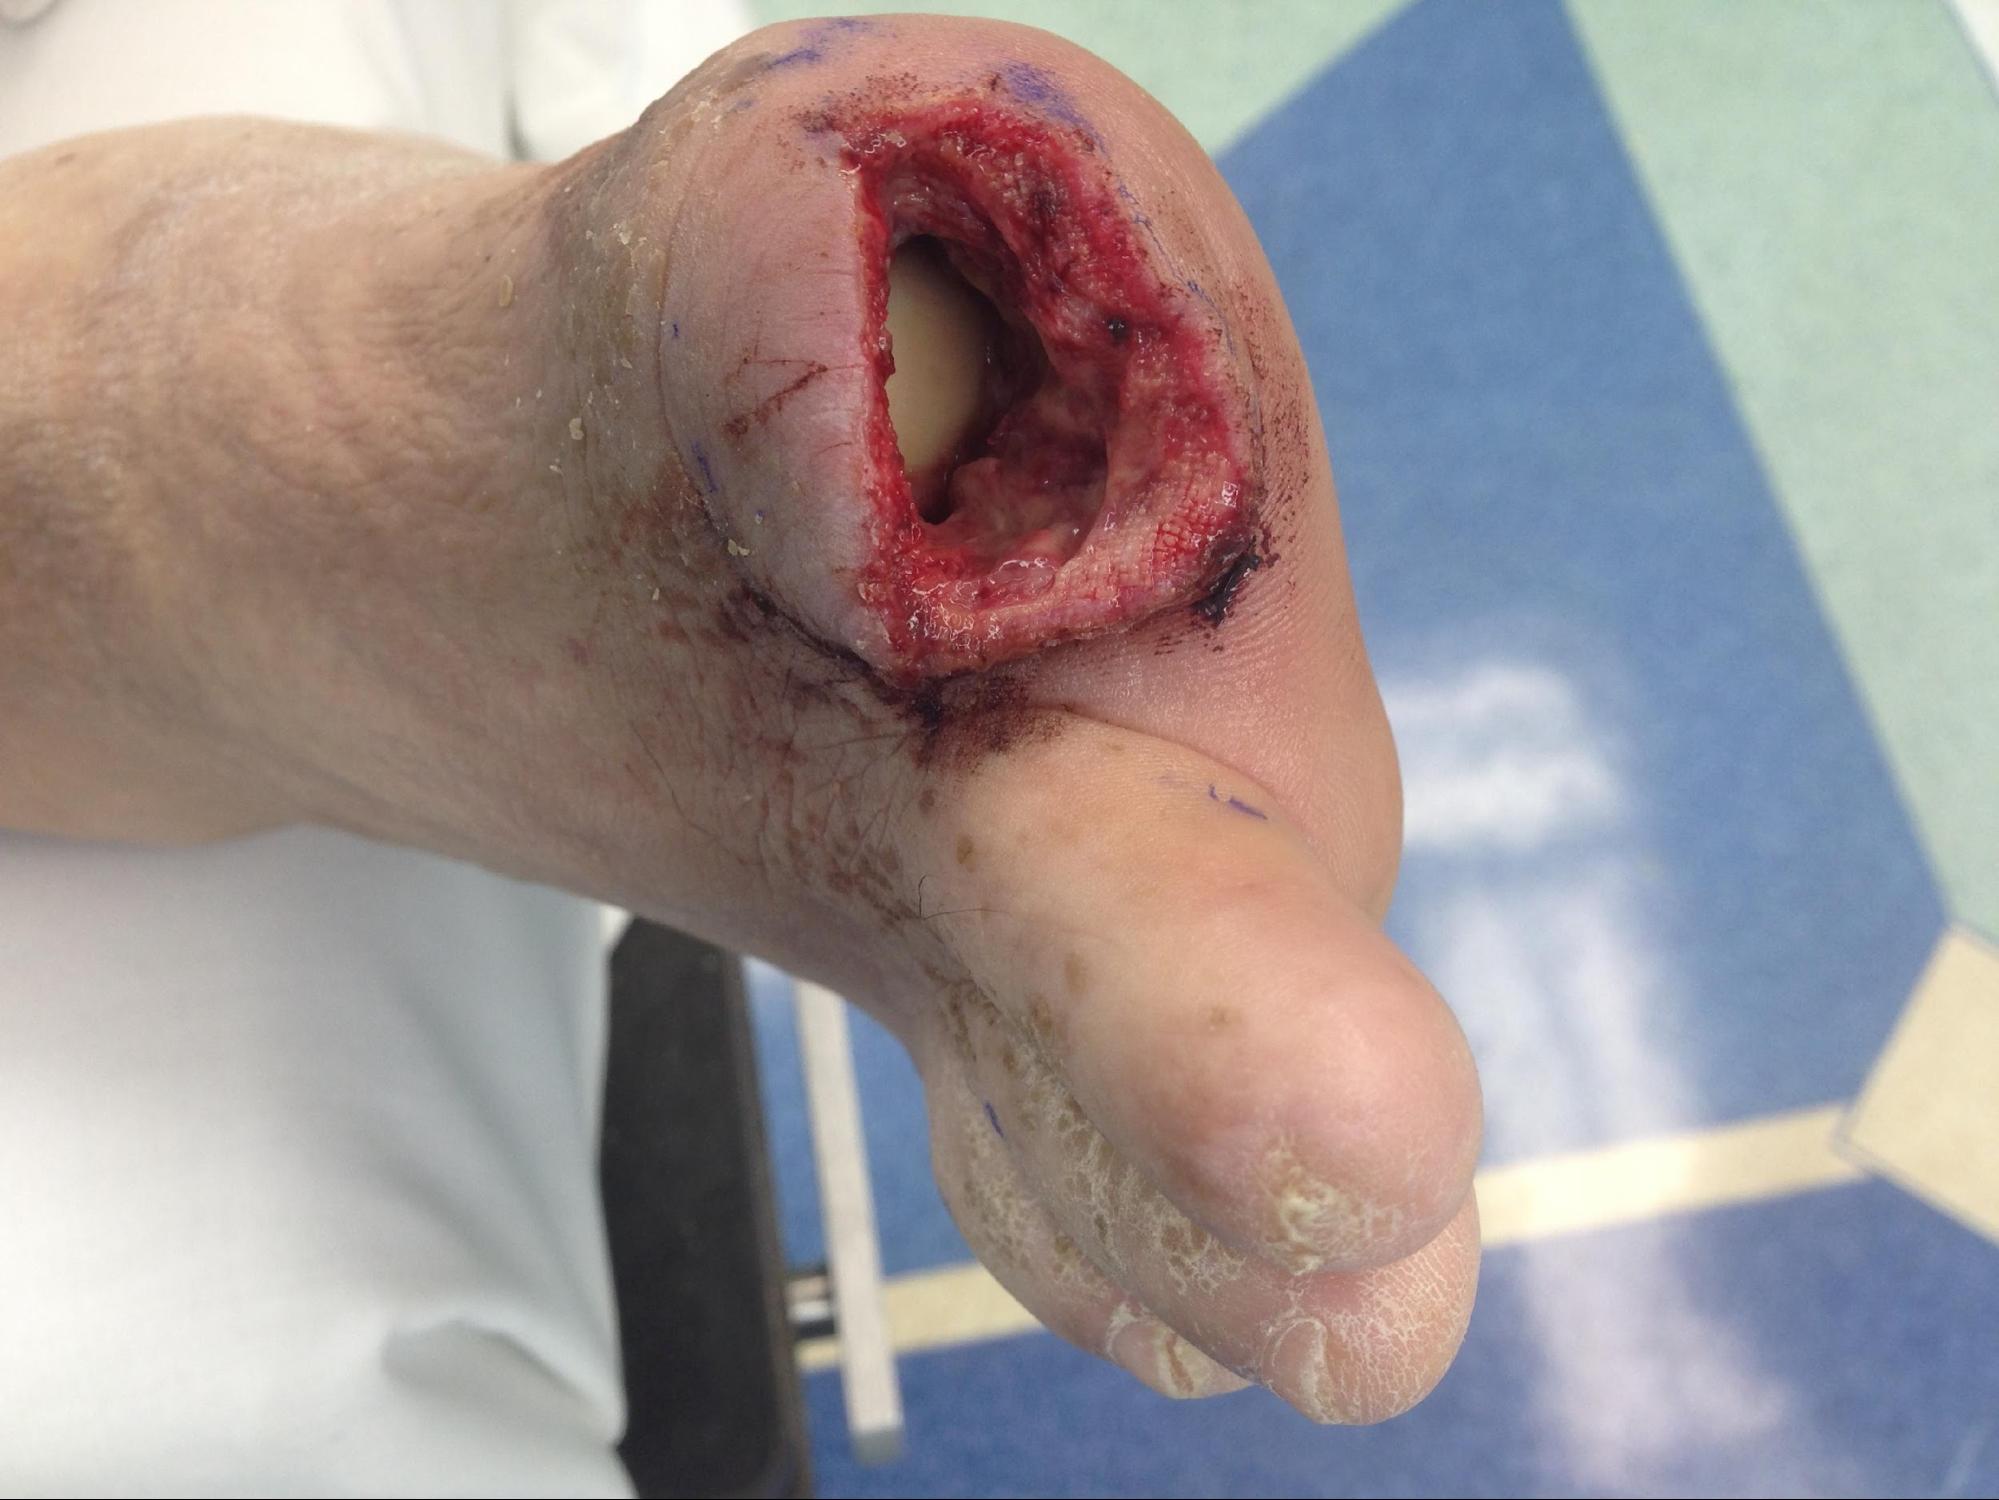 Digital Amputation
Surgical amputation of the right hallux secondary to osteomyelitis. 
Not the Exposed 1st metatarsal head within the wound. 